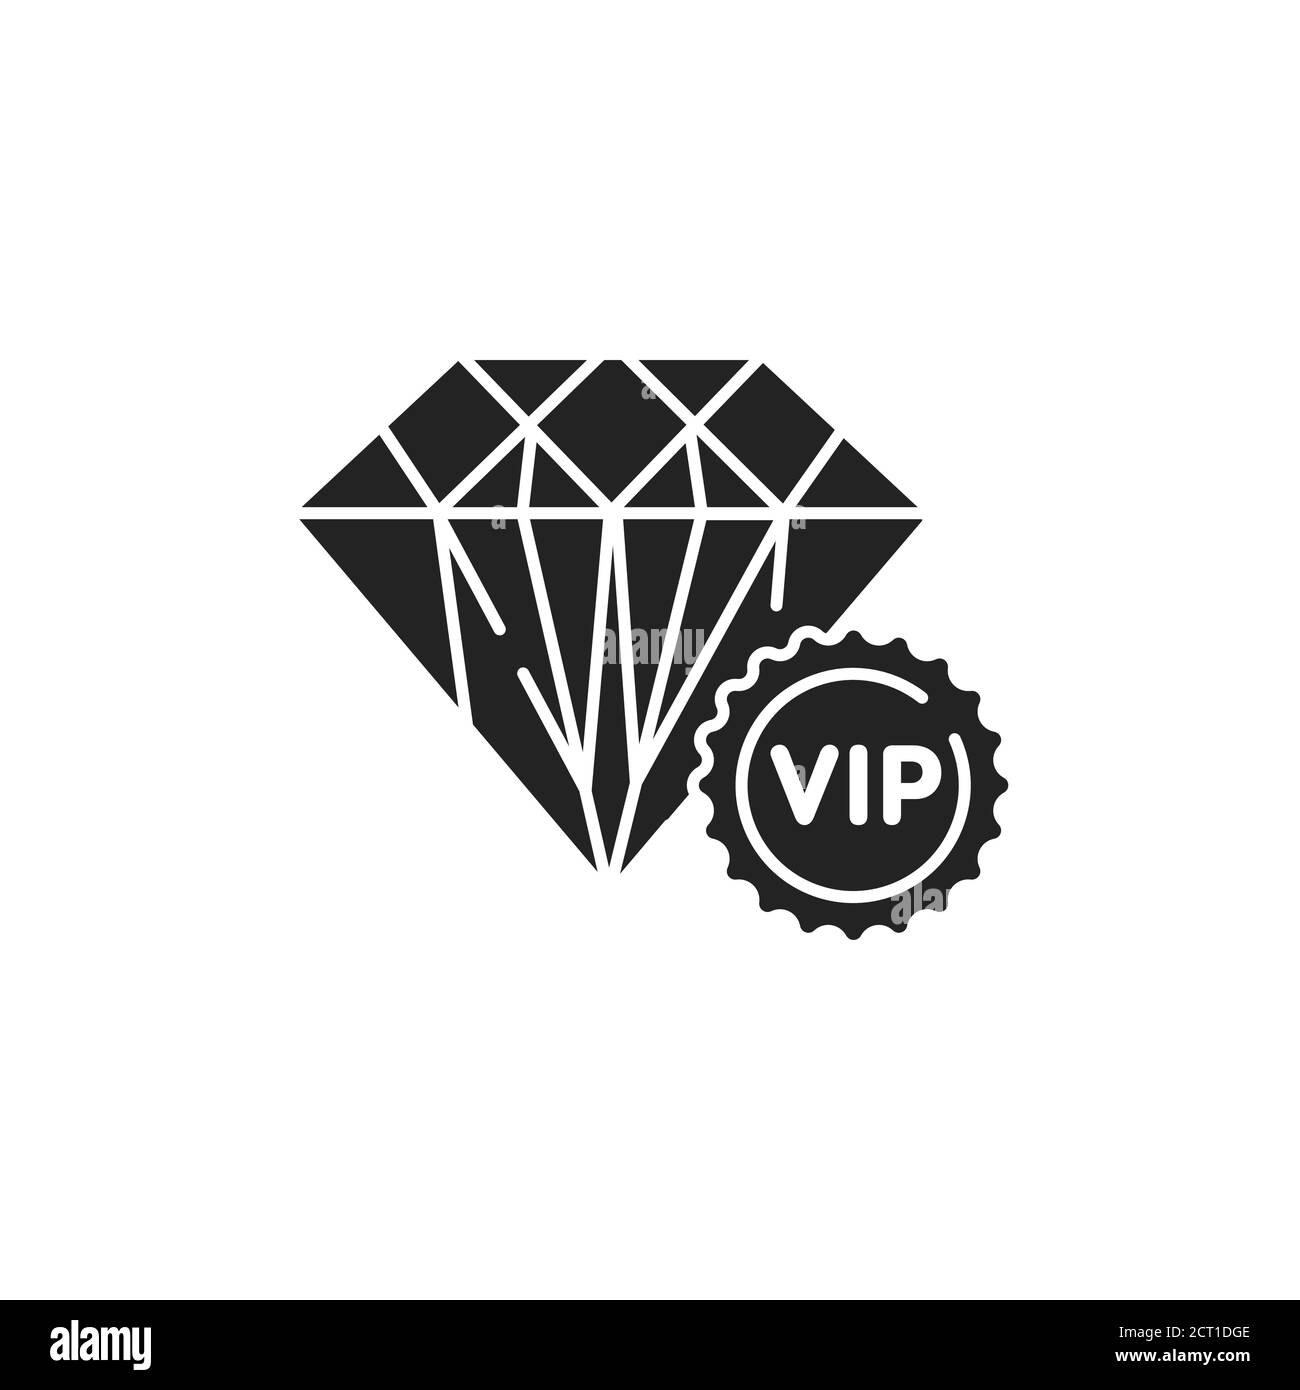 Luxury lifestyle glyph black icon. Jewelry concept. Vip club. Sign for web page, mobile app, button, logo. Stock Vector